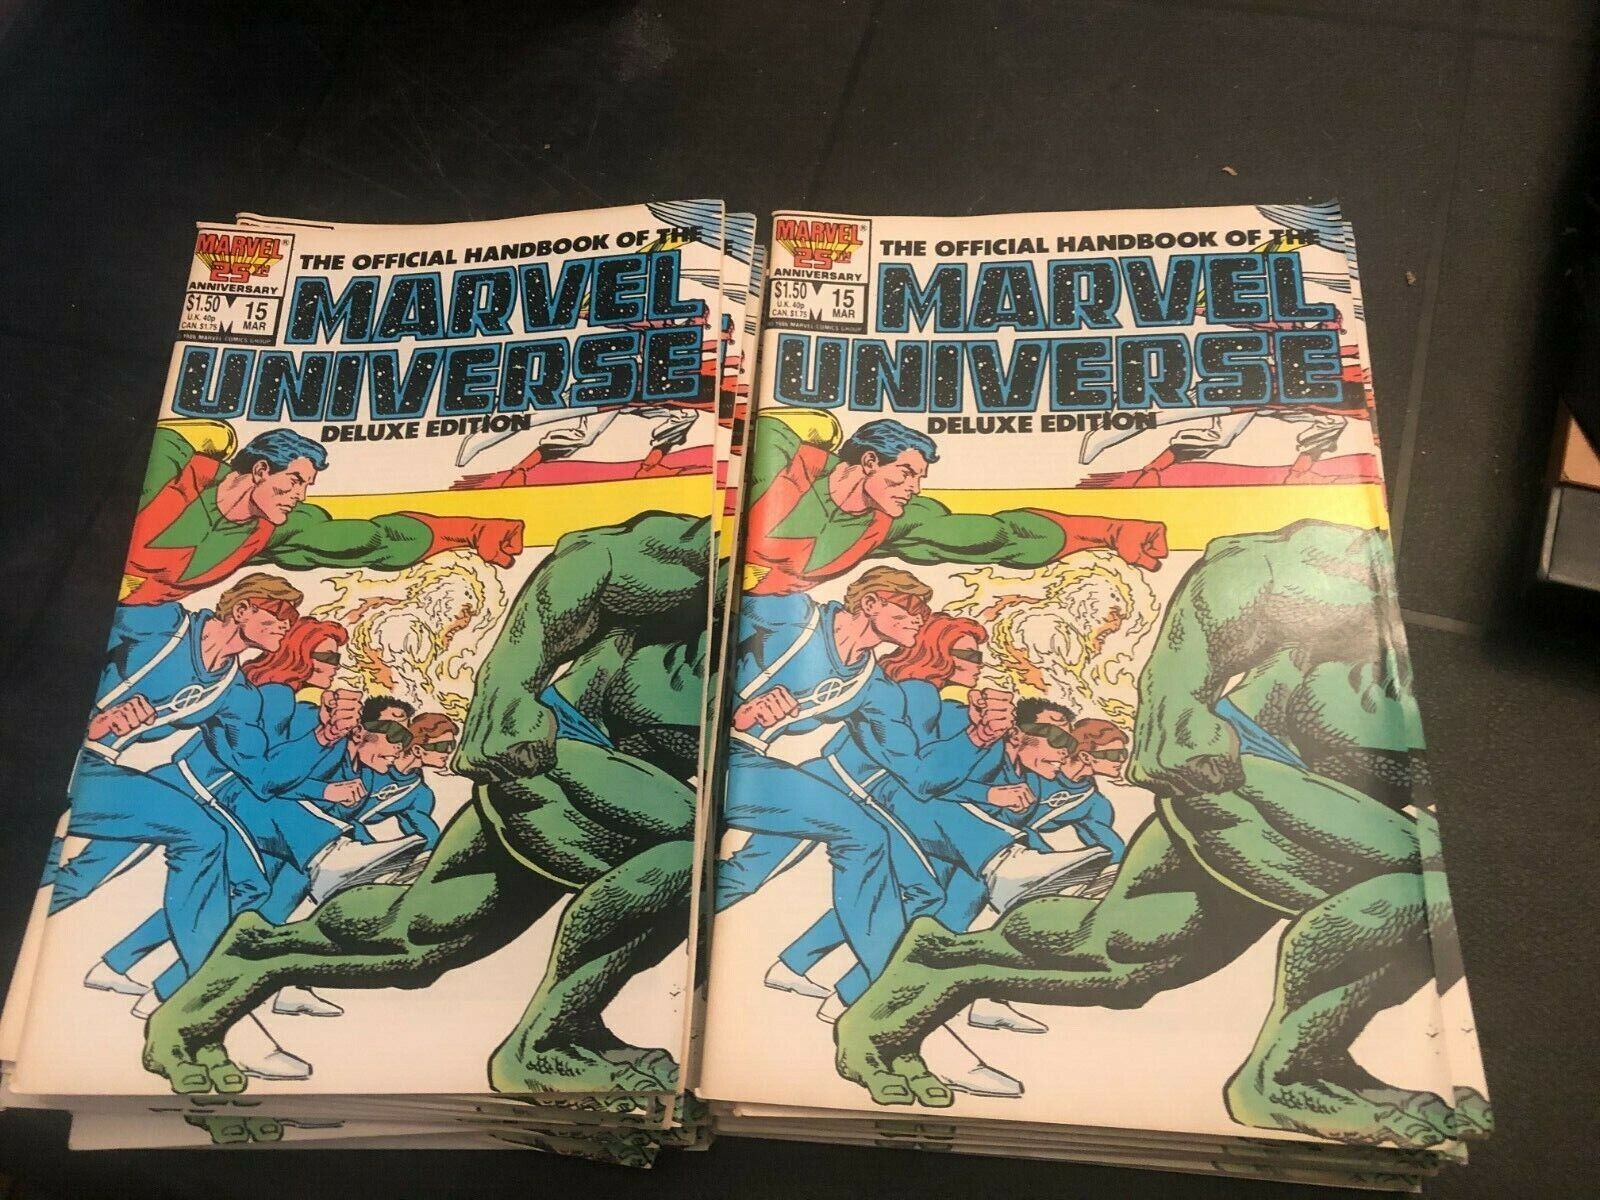 OFFICIAL HANDBOOK OF THE MARVEL UNIVERSE DELUXE EDITION lot of 24